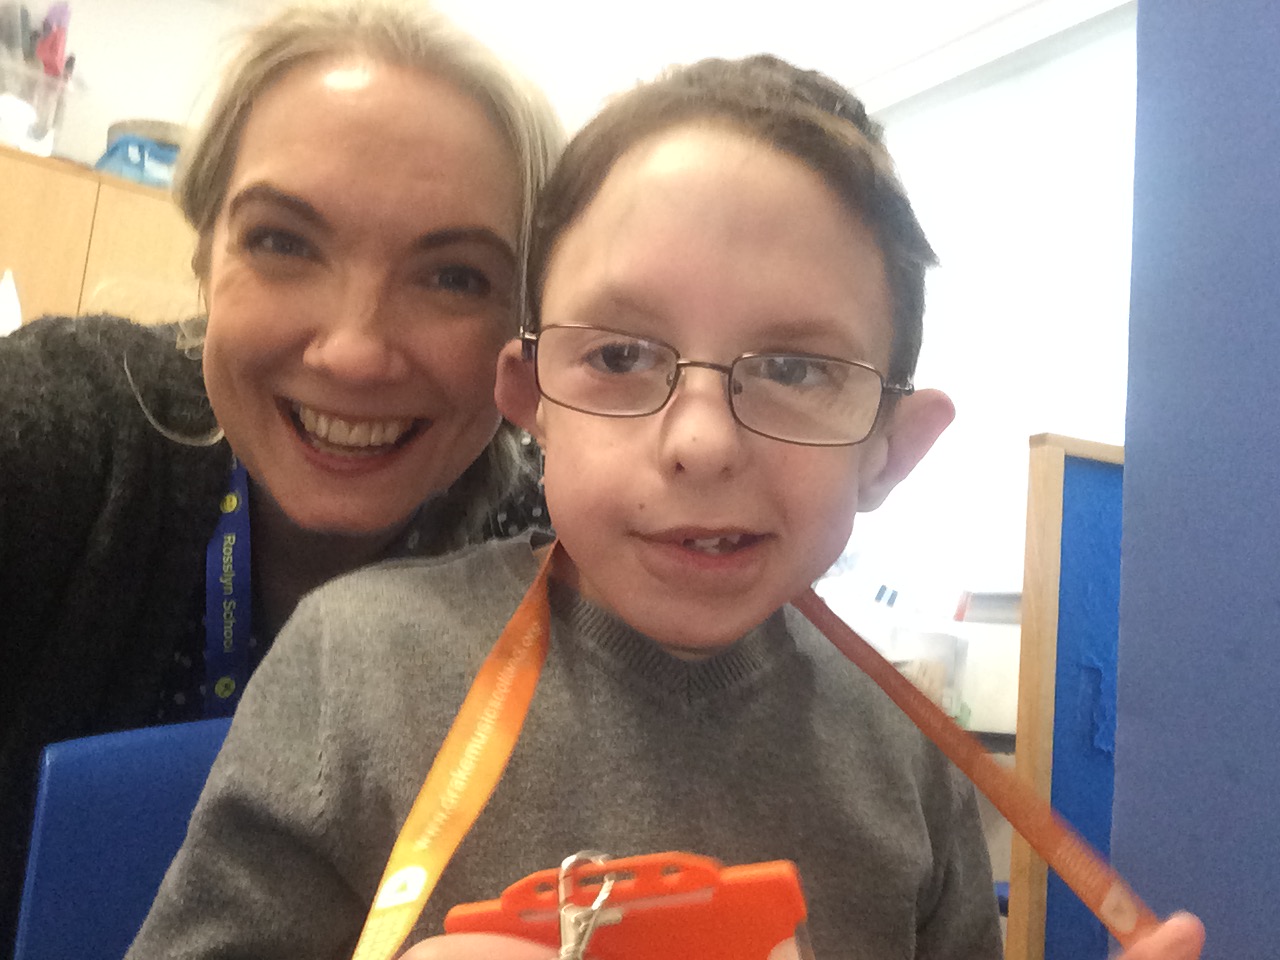 A smiling blonde woman with her head close to a smiling little boy in glasses. Their faces are side by side.